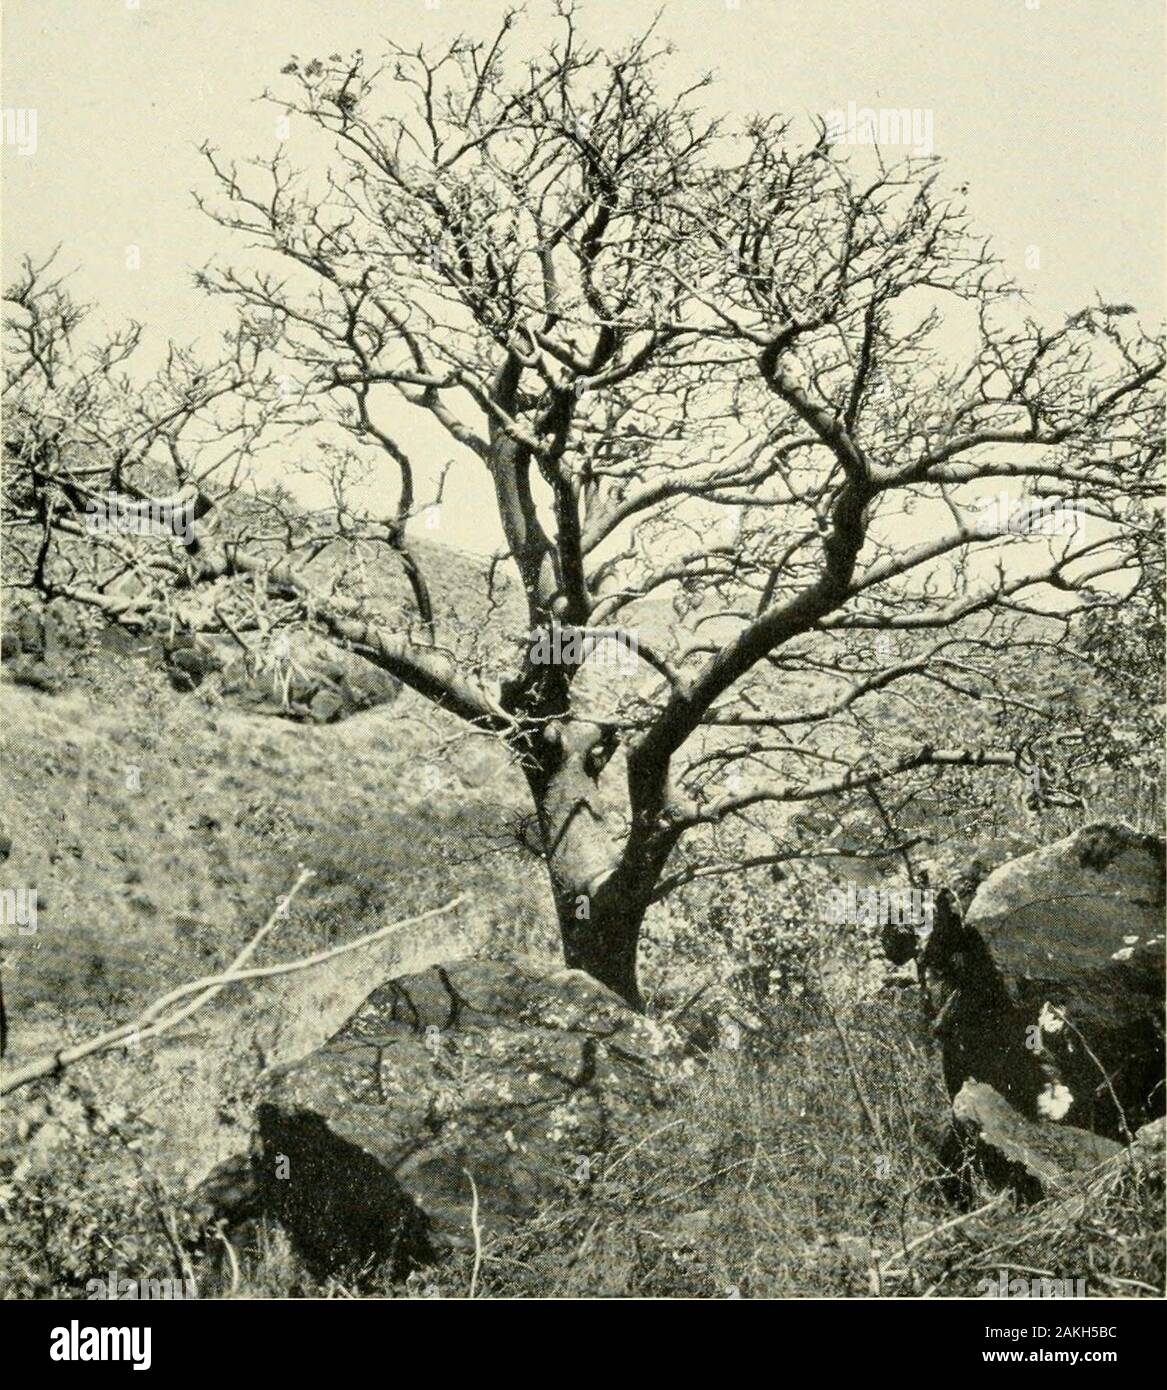 Expeditions organized or participated in by the Smithsonian Institution.. . li(.. 72.— Iruiik i)f a large koa tree (Acacia koa), on the eastern slope ofManila Loa. Hawaii. A valuable wood much used in cabinet making, especiallyfor ukuleles. NO. r SMITHSONIAX EXPLORATIONS, I916 69 The indigenous grasses of the Hawaiian Islands are not numerous.The most interesting l^elong to the genera Panicum and P^ragrostis.A tall sjiecies of the latter [E. atropioides) is the dominant grassupon the plain hetvveen Alauna Loa and Mauna Kea. Three peculiar. Fic. y^.—Wiliwili {Hrythrina iiwnospcrma), in an arid Stock Photo